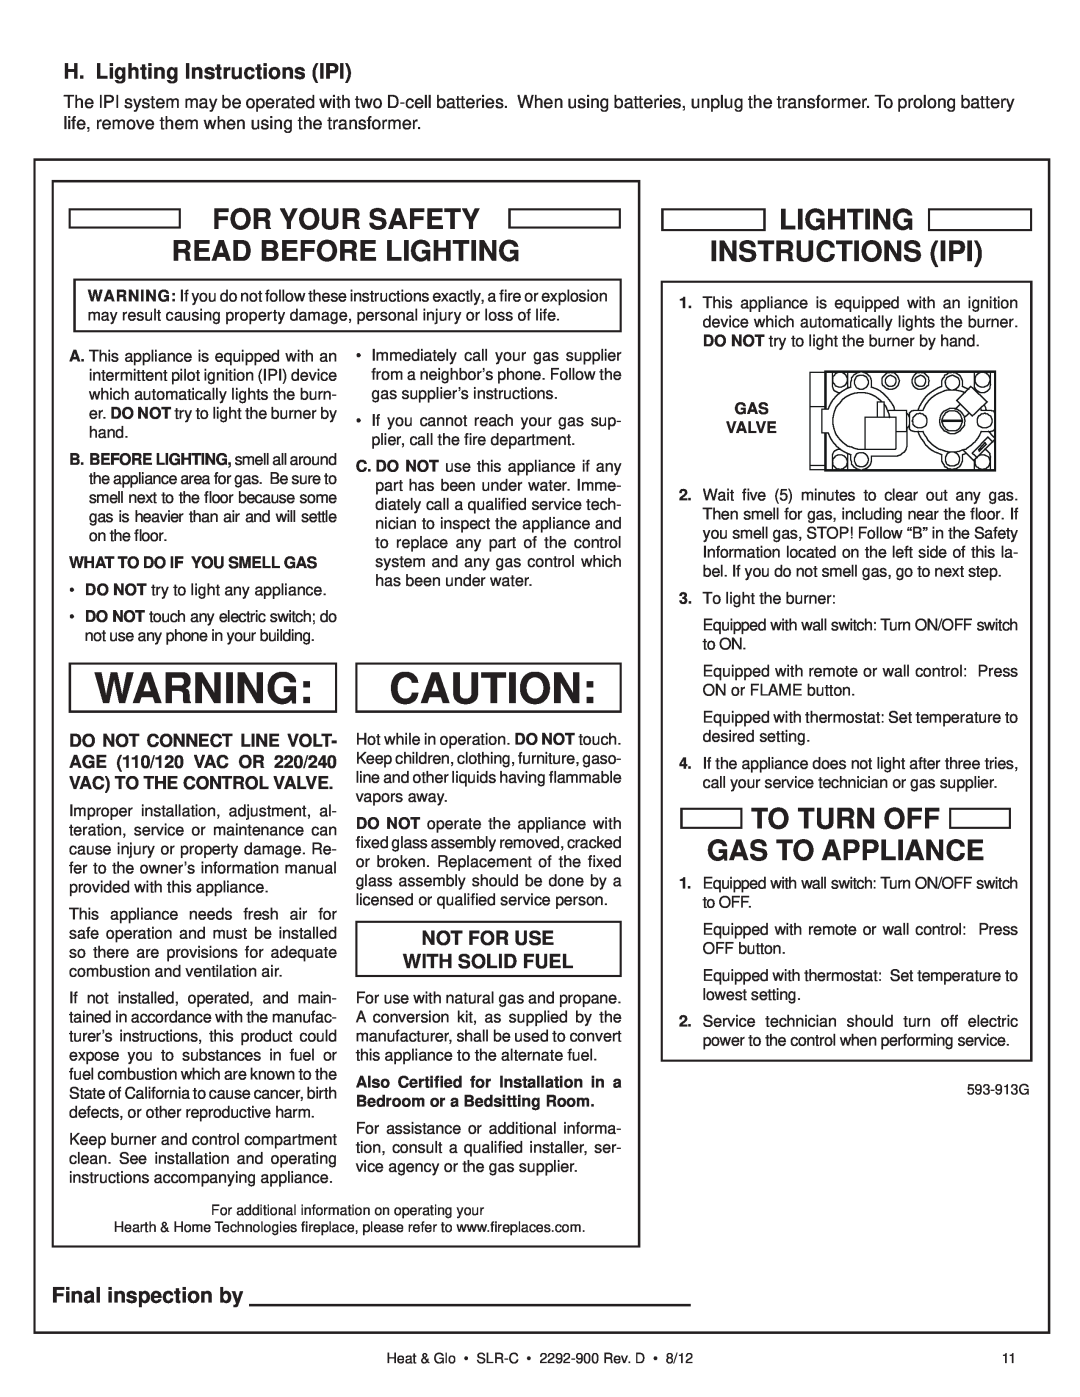 Heat & Glo LifeStyle SLR-C (COSMO) H. Lighting Instructions IPI, Final inspection by, For Your Safety Read Before Lighting 